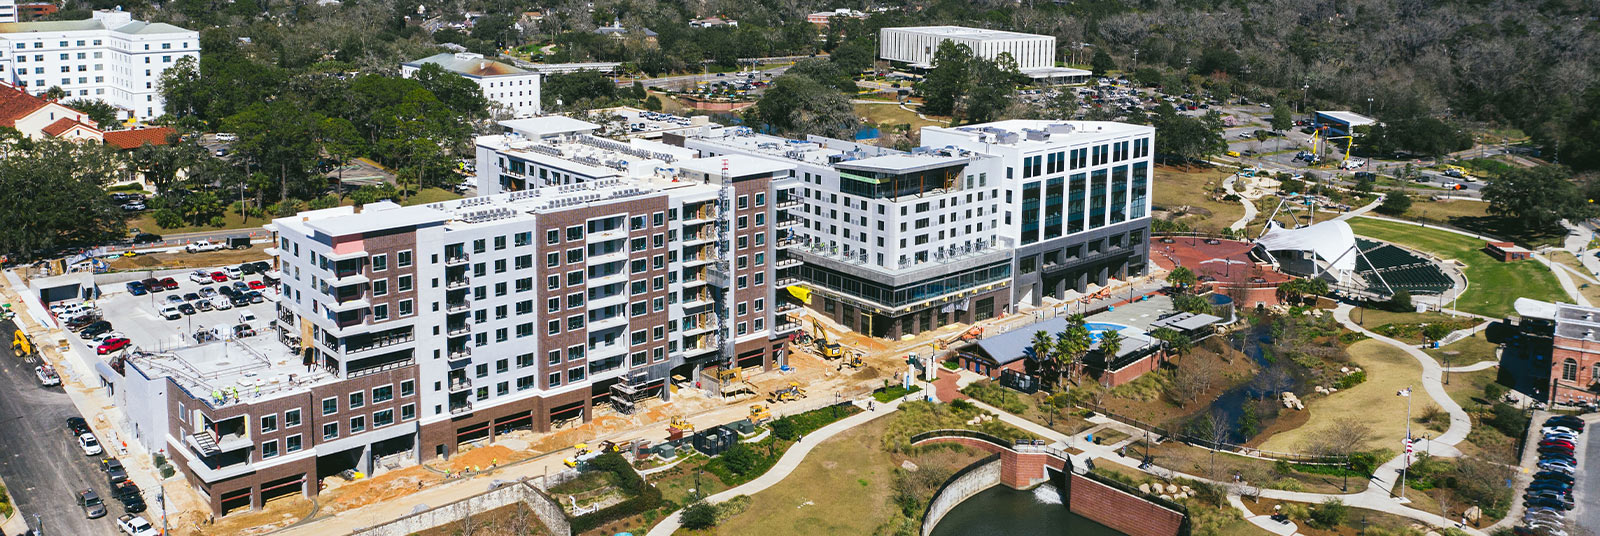 Aerial photo of the Cascades development in Tallahassee, Florida.